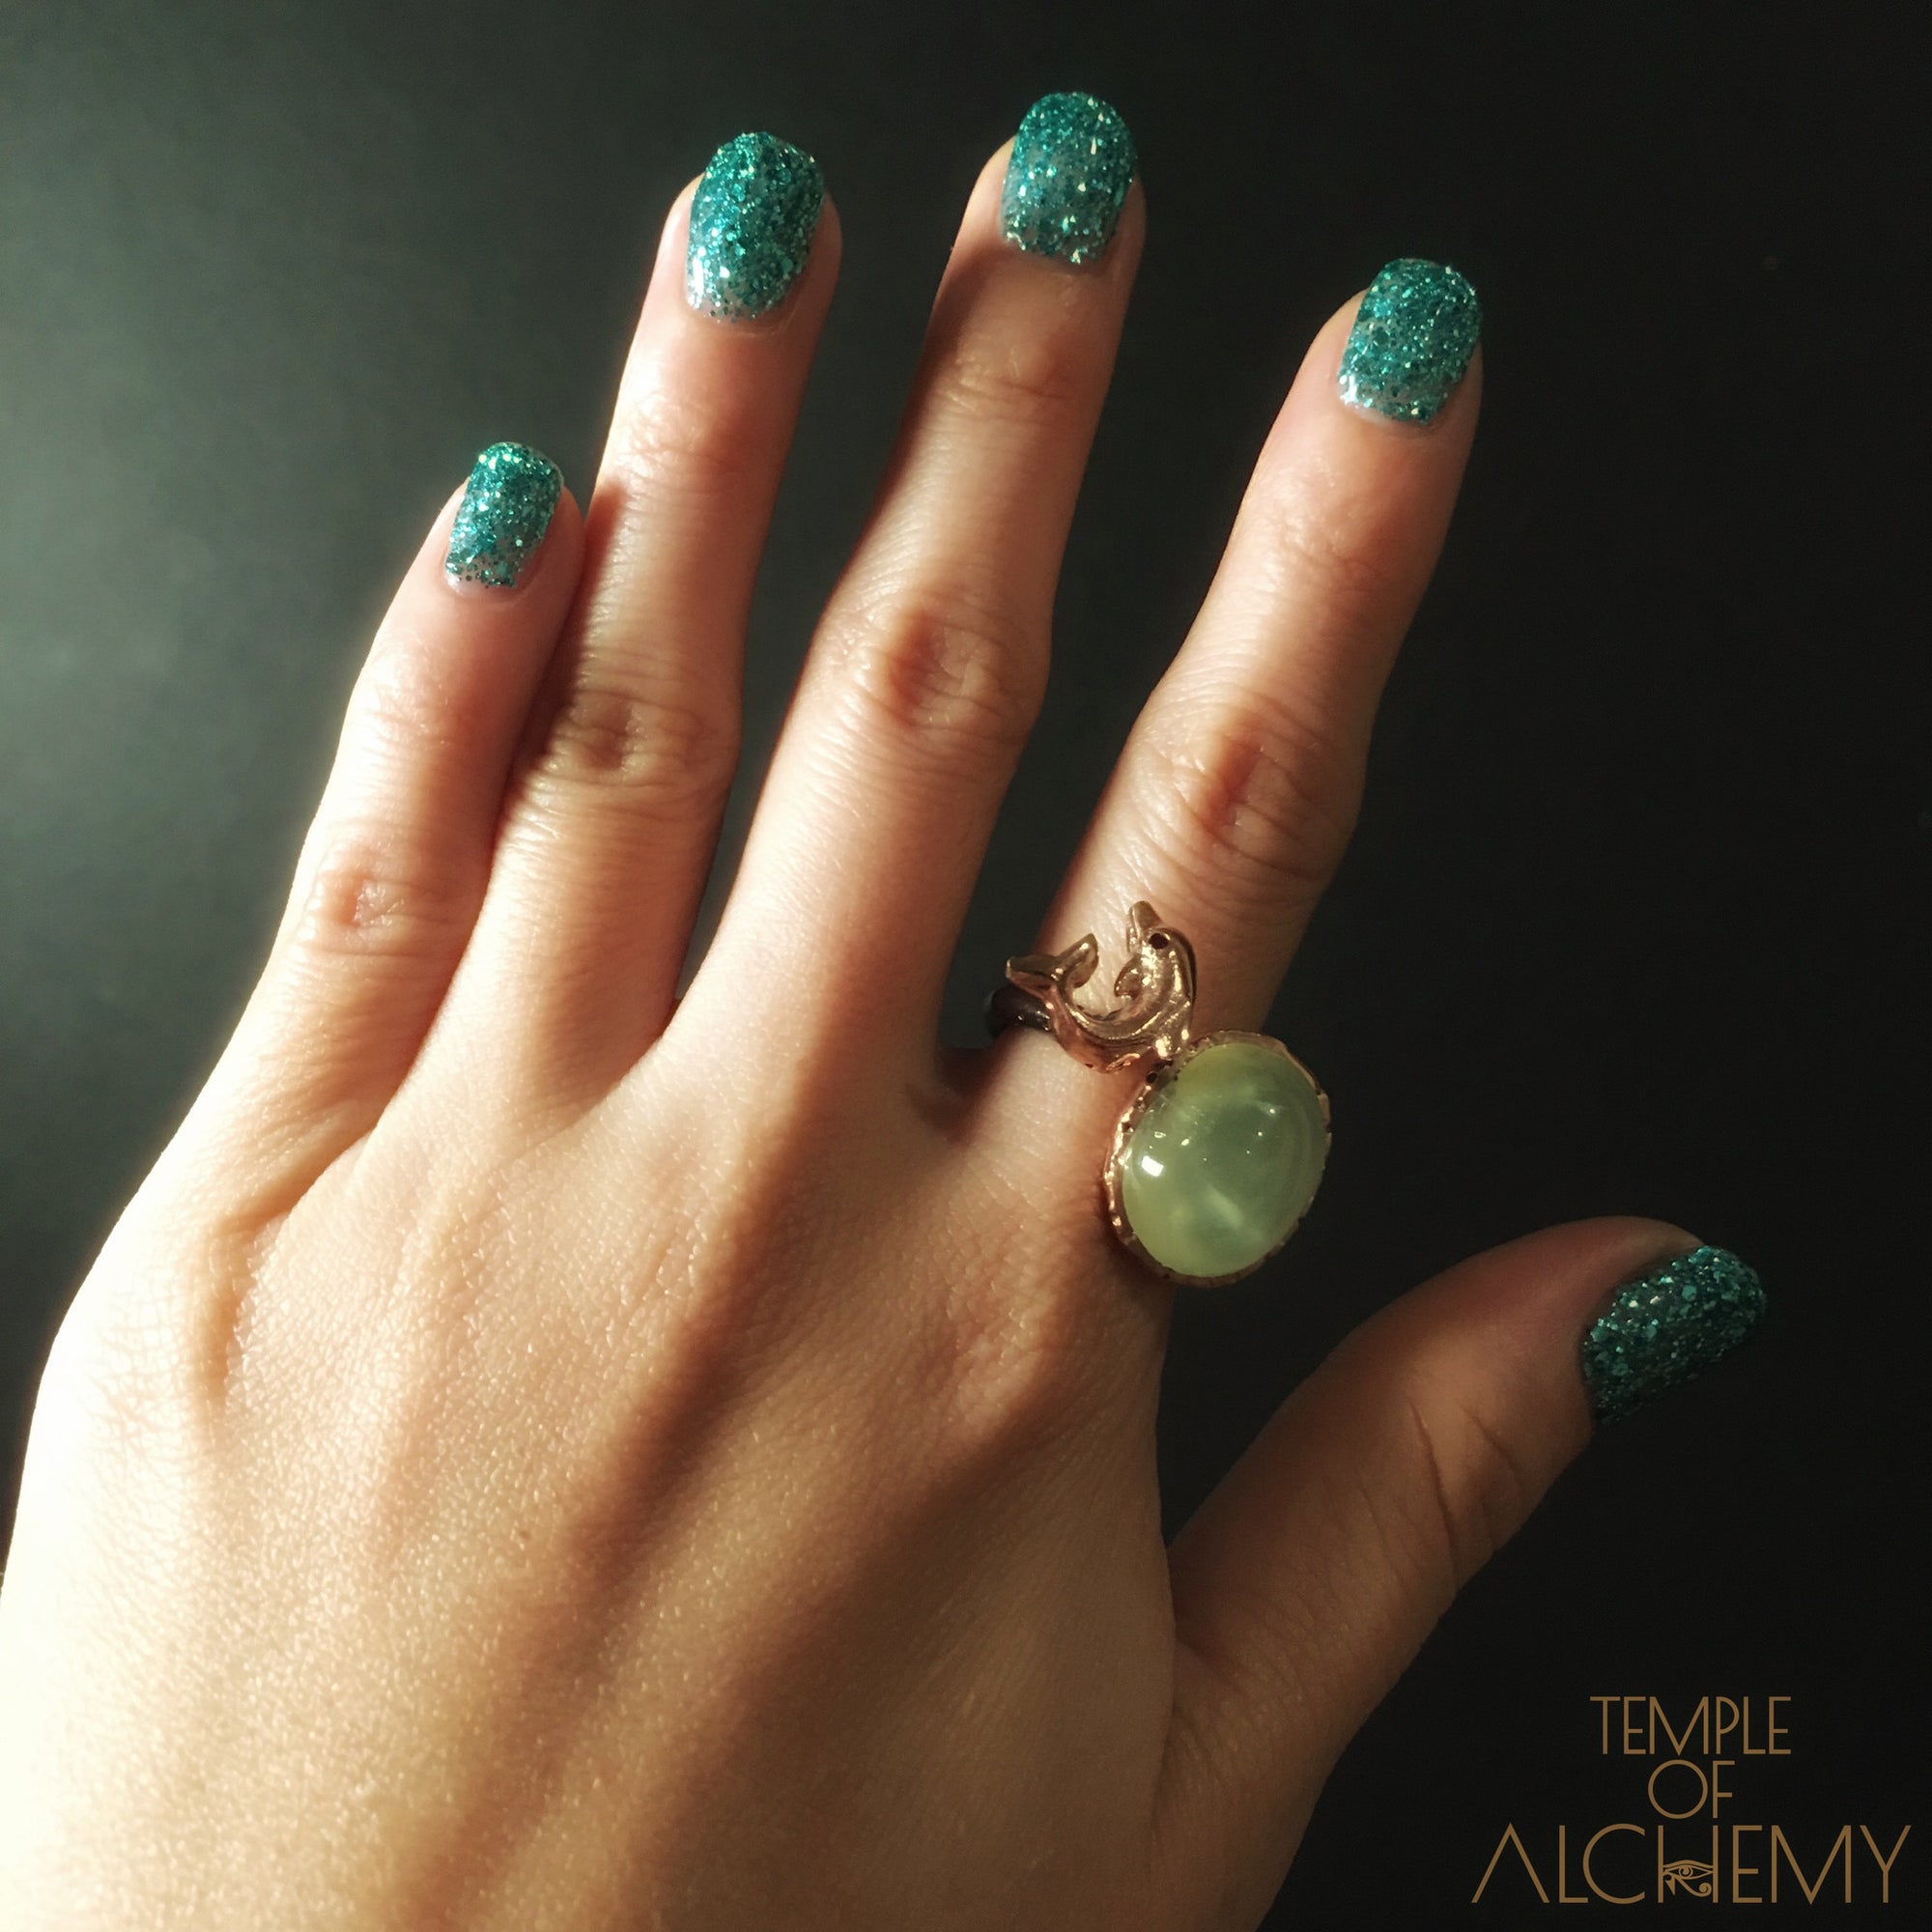 Dolphin Totem Ring : Prehnite with Black Spinel - jewelry - Temple of Alchemy - 4